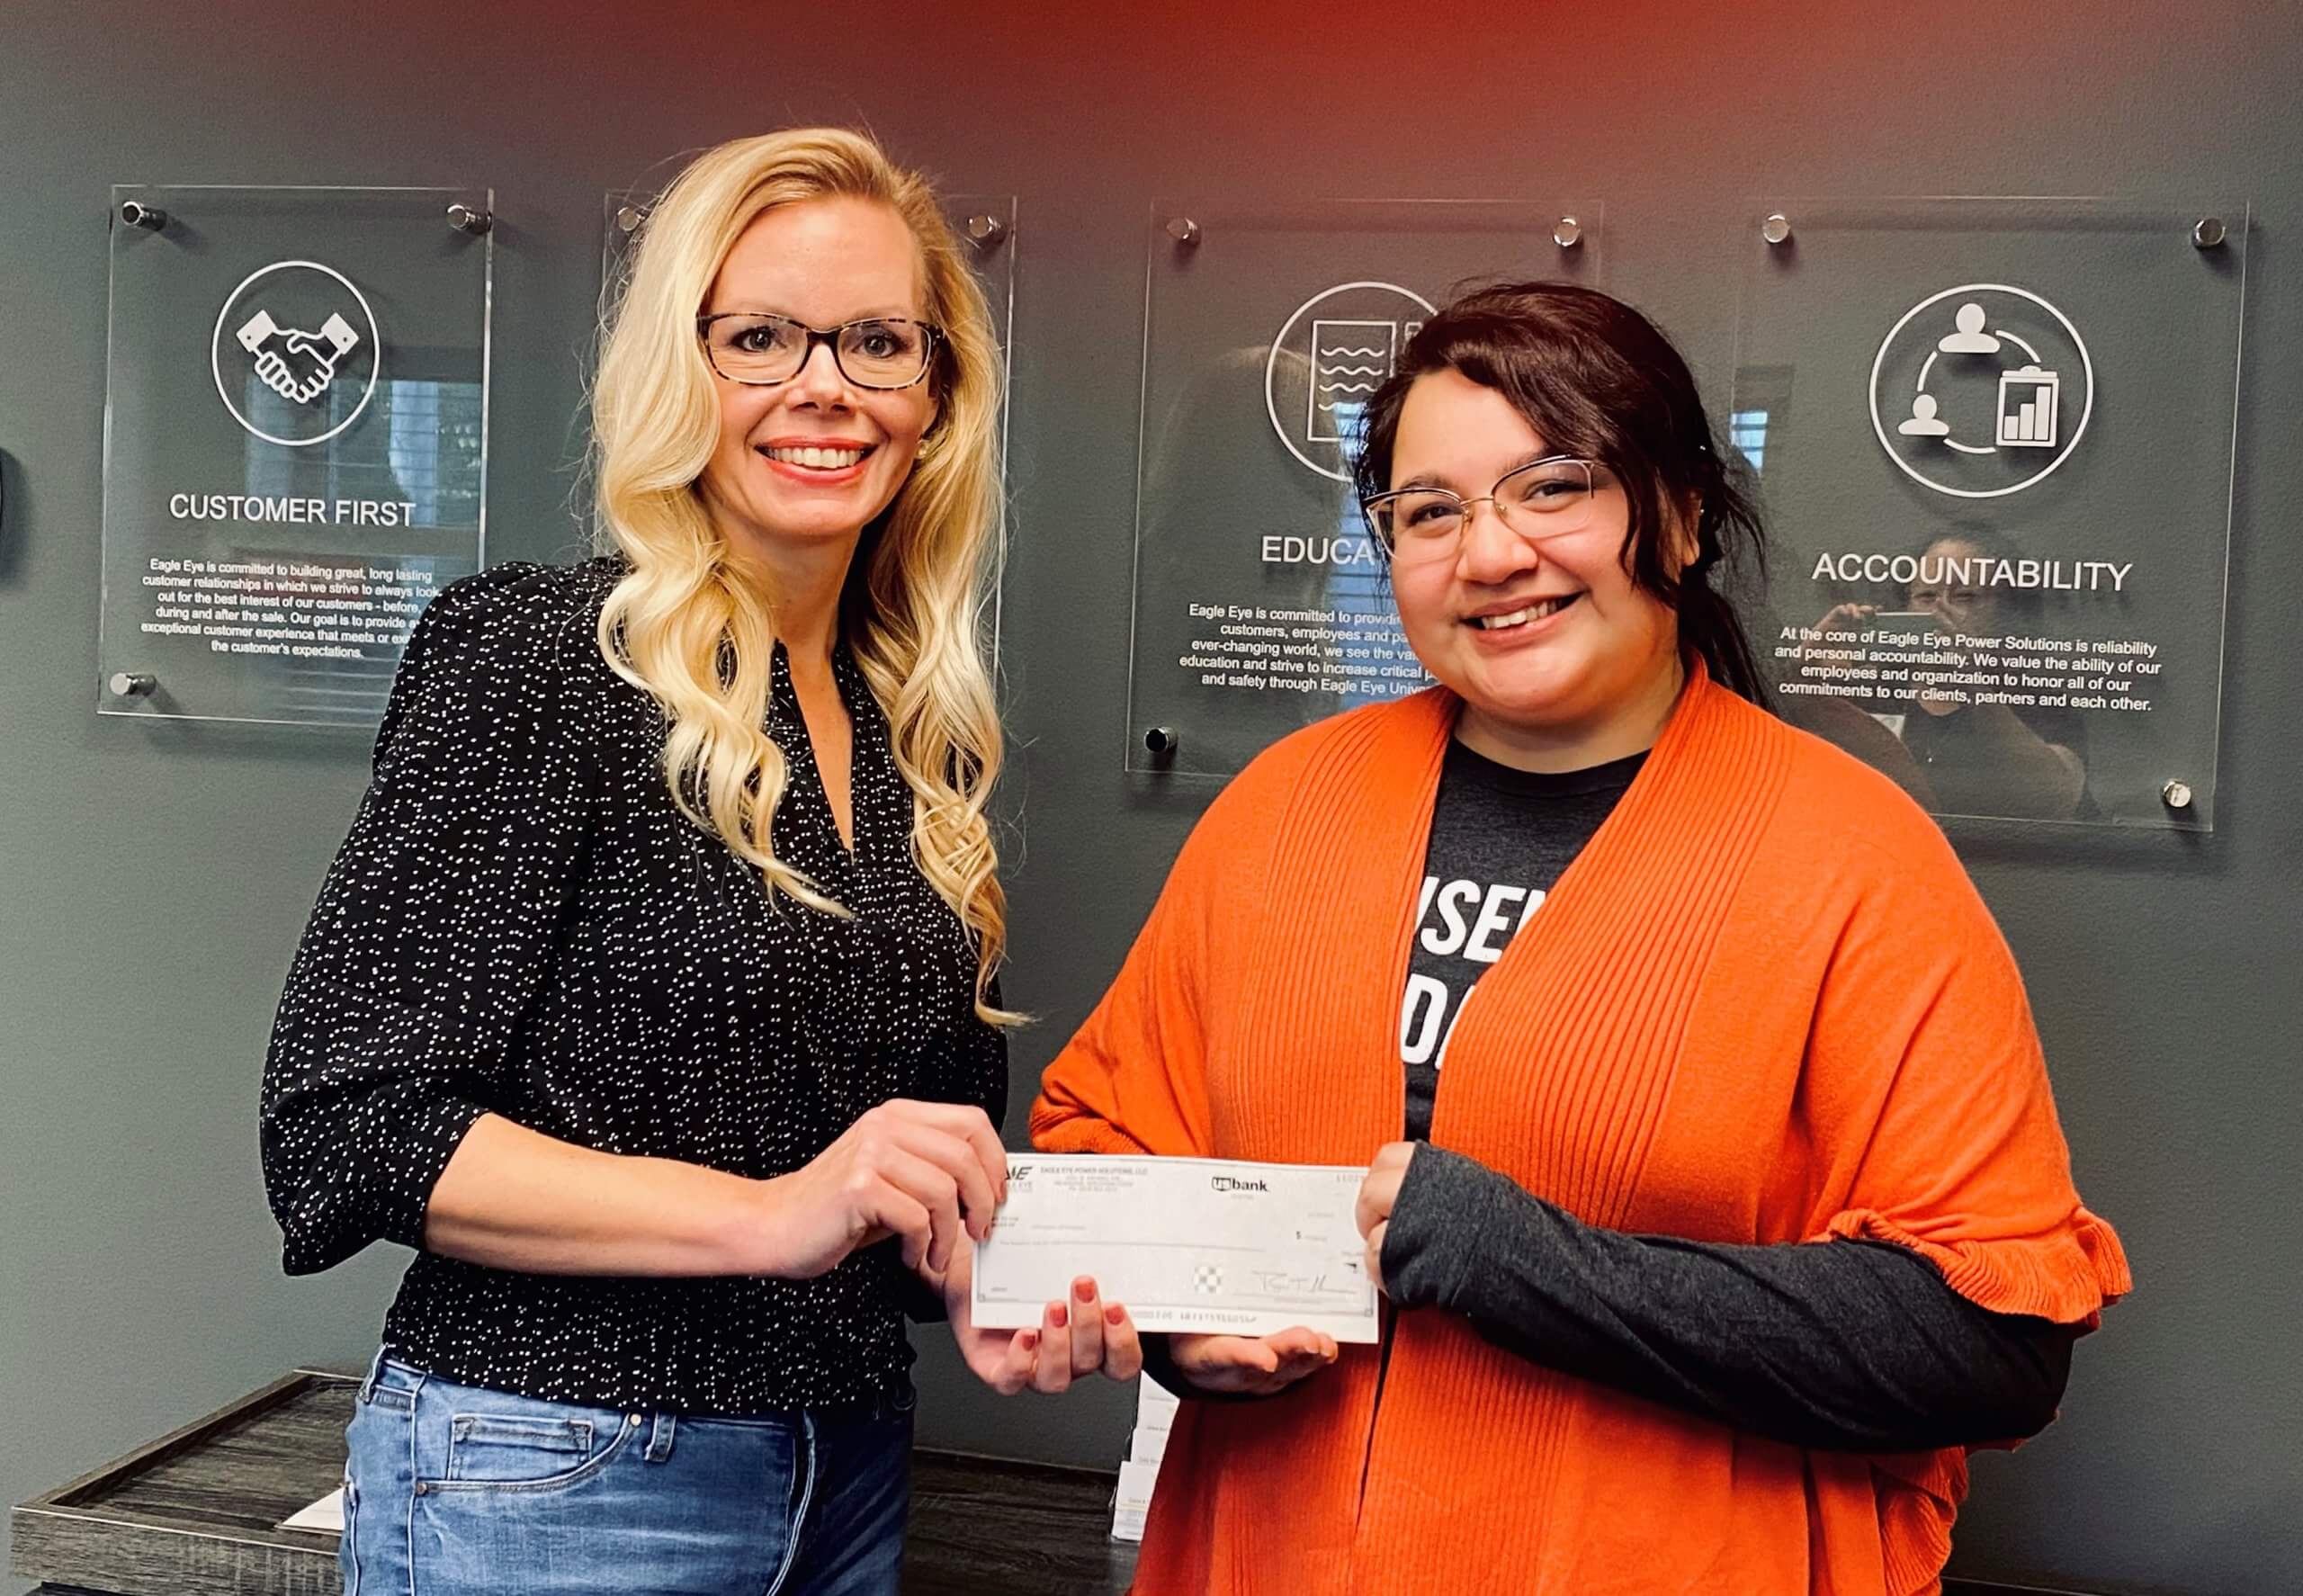 Marketing Coordinator Marlie Antonic handing a check from Eagle Eye Power Solutions to a representative of Advocates of Ozaukee.